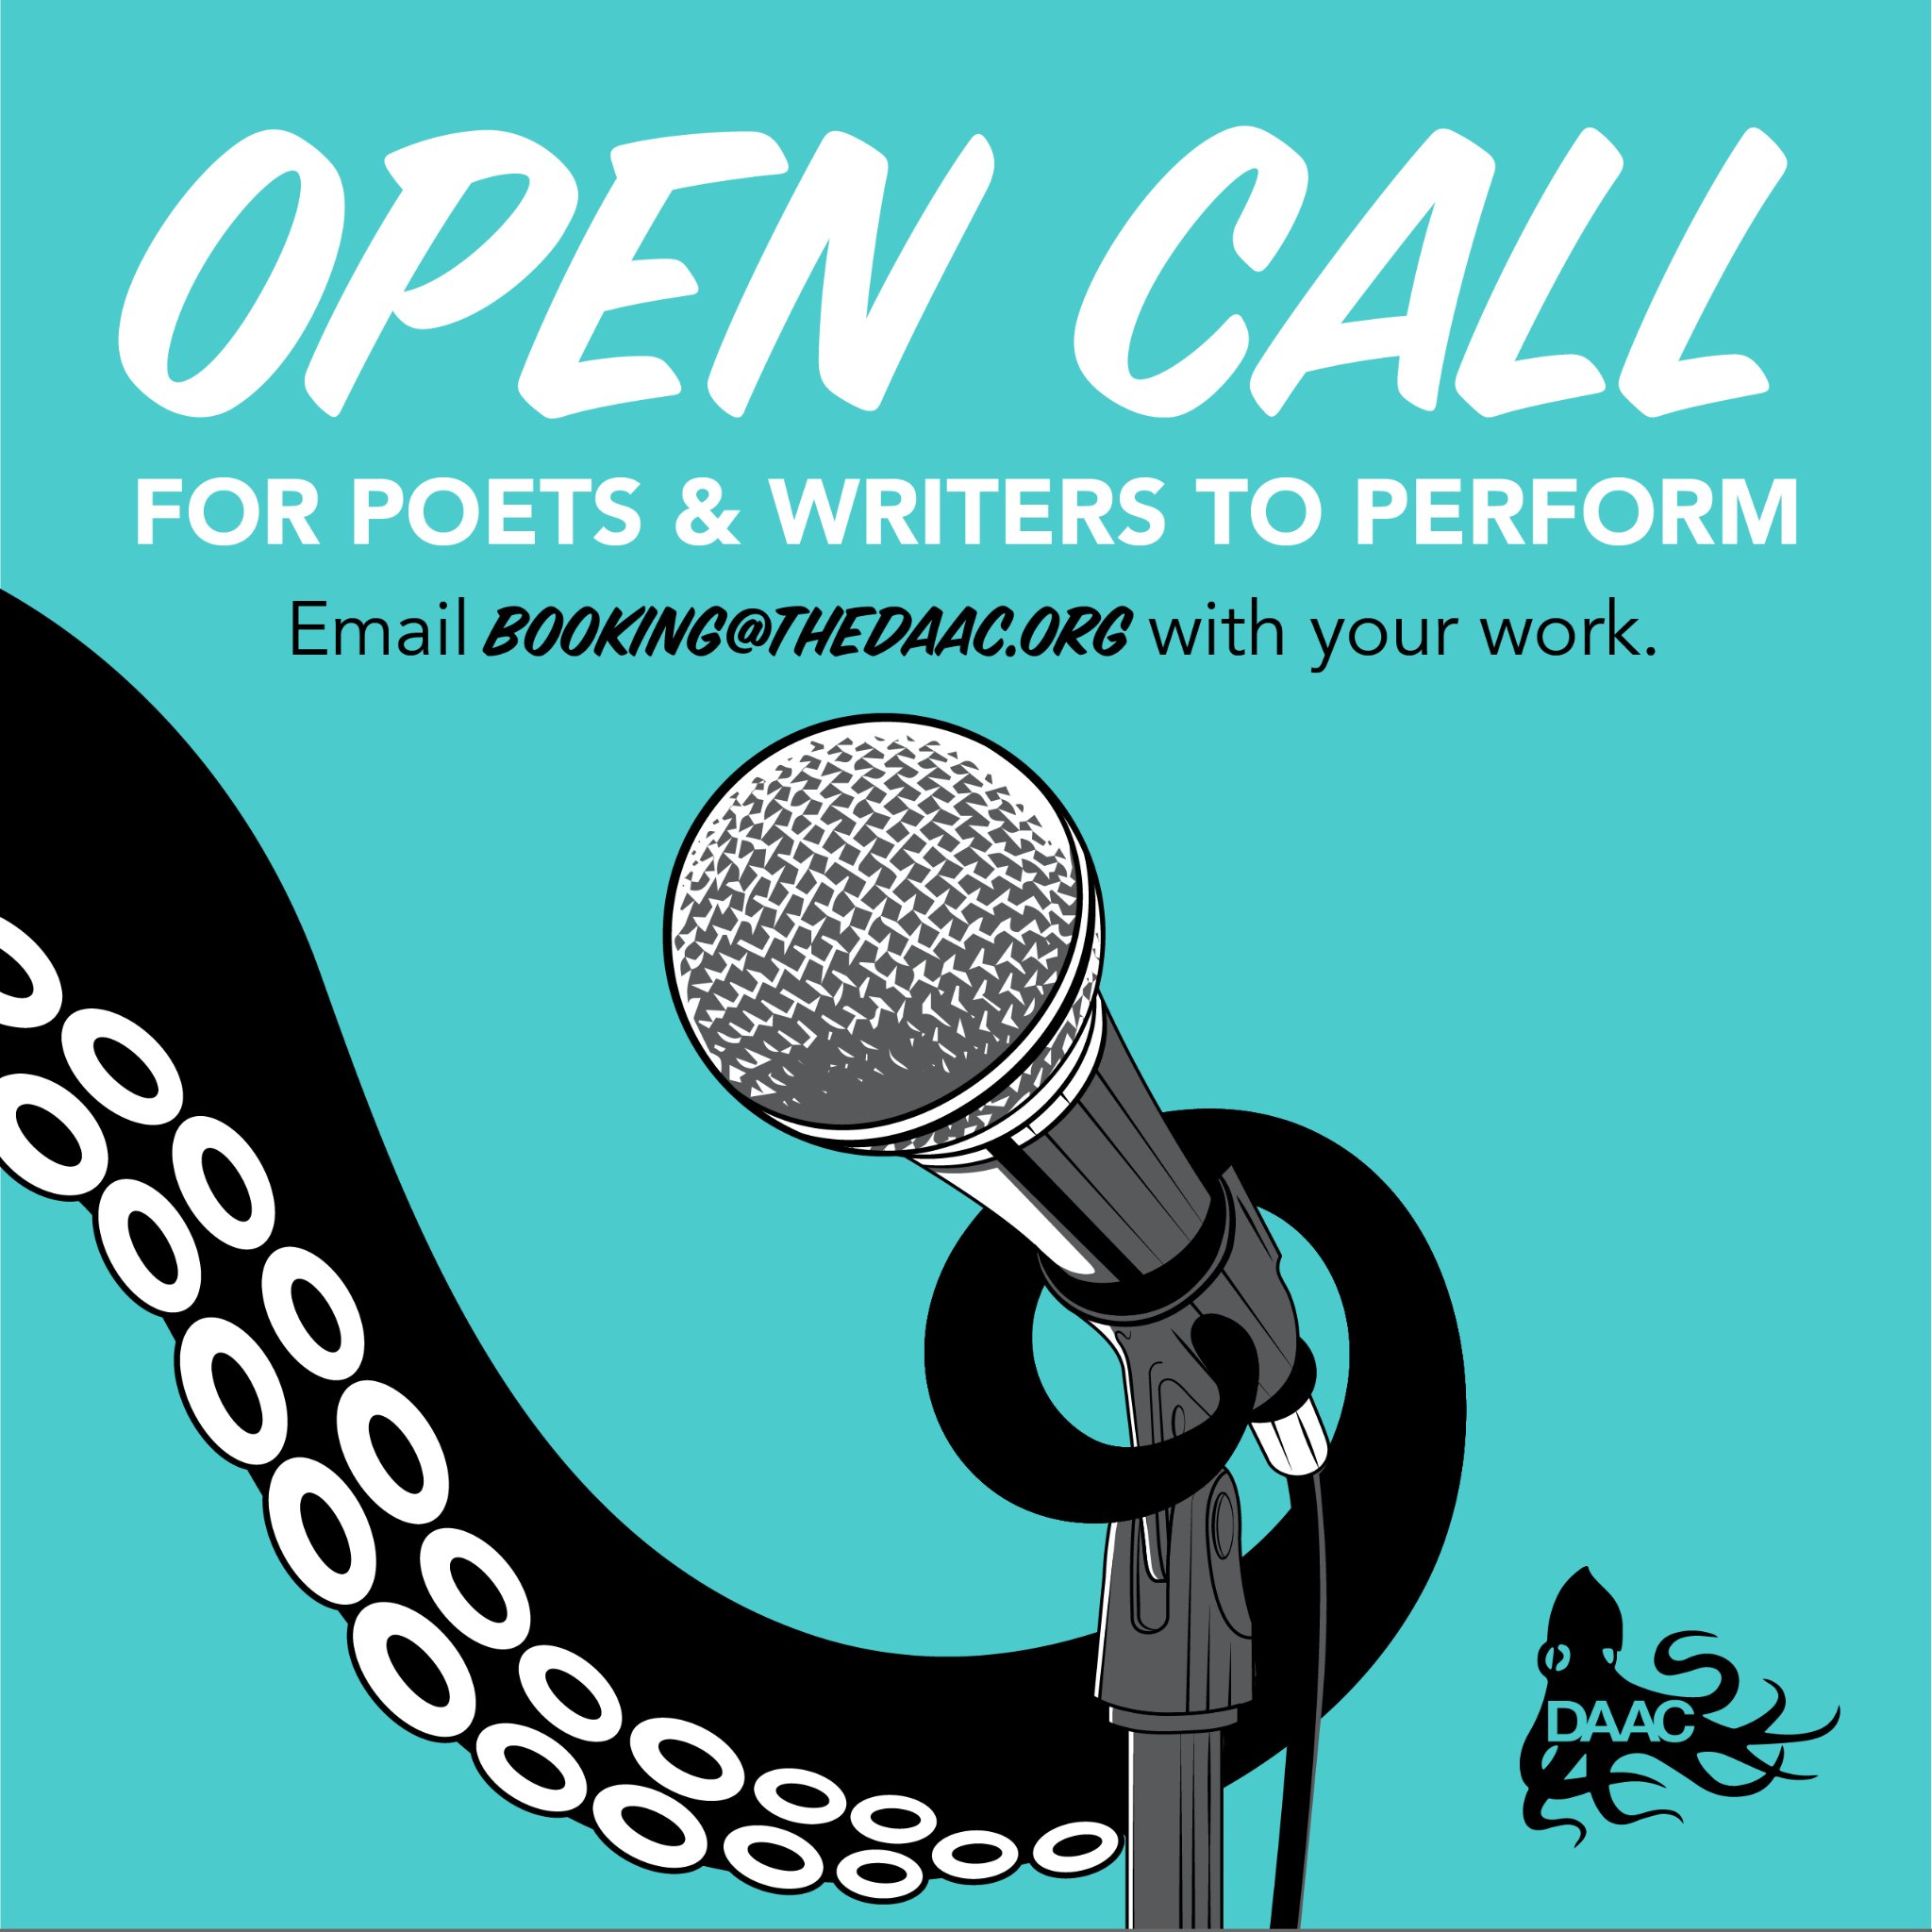 Open Call for Poets & Writers to Perform - Email booking@thedaac.org with your work